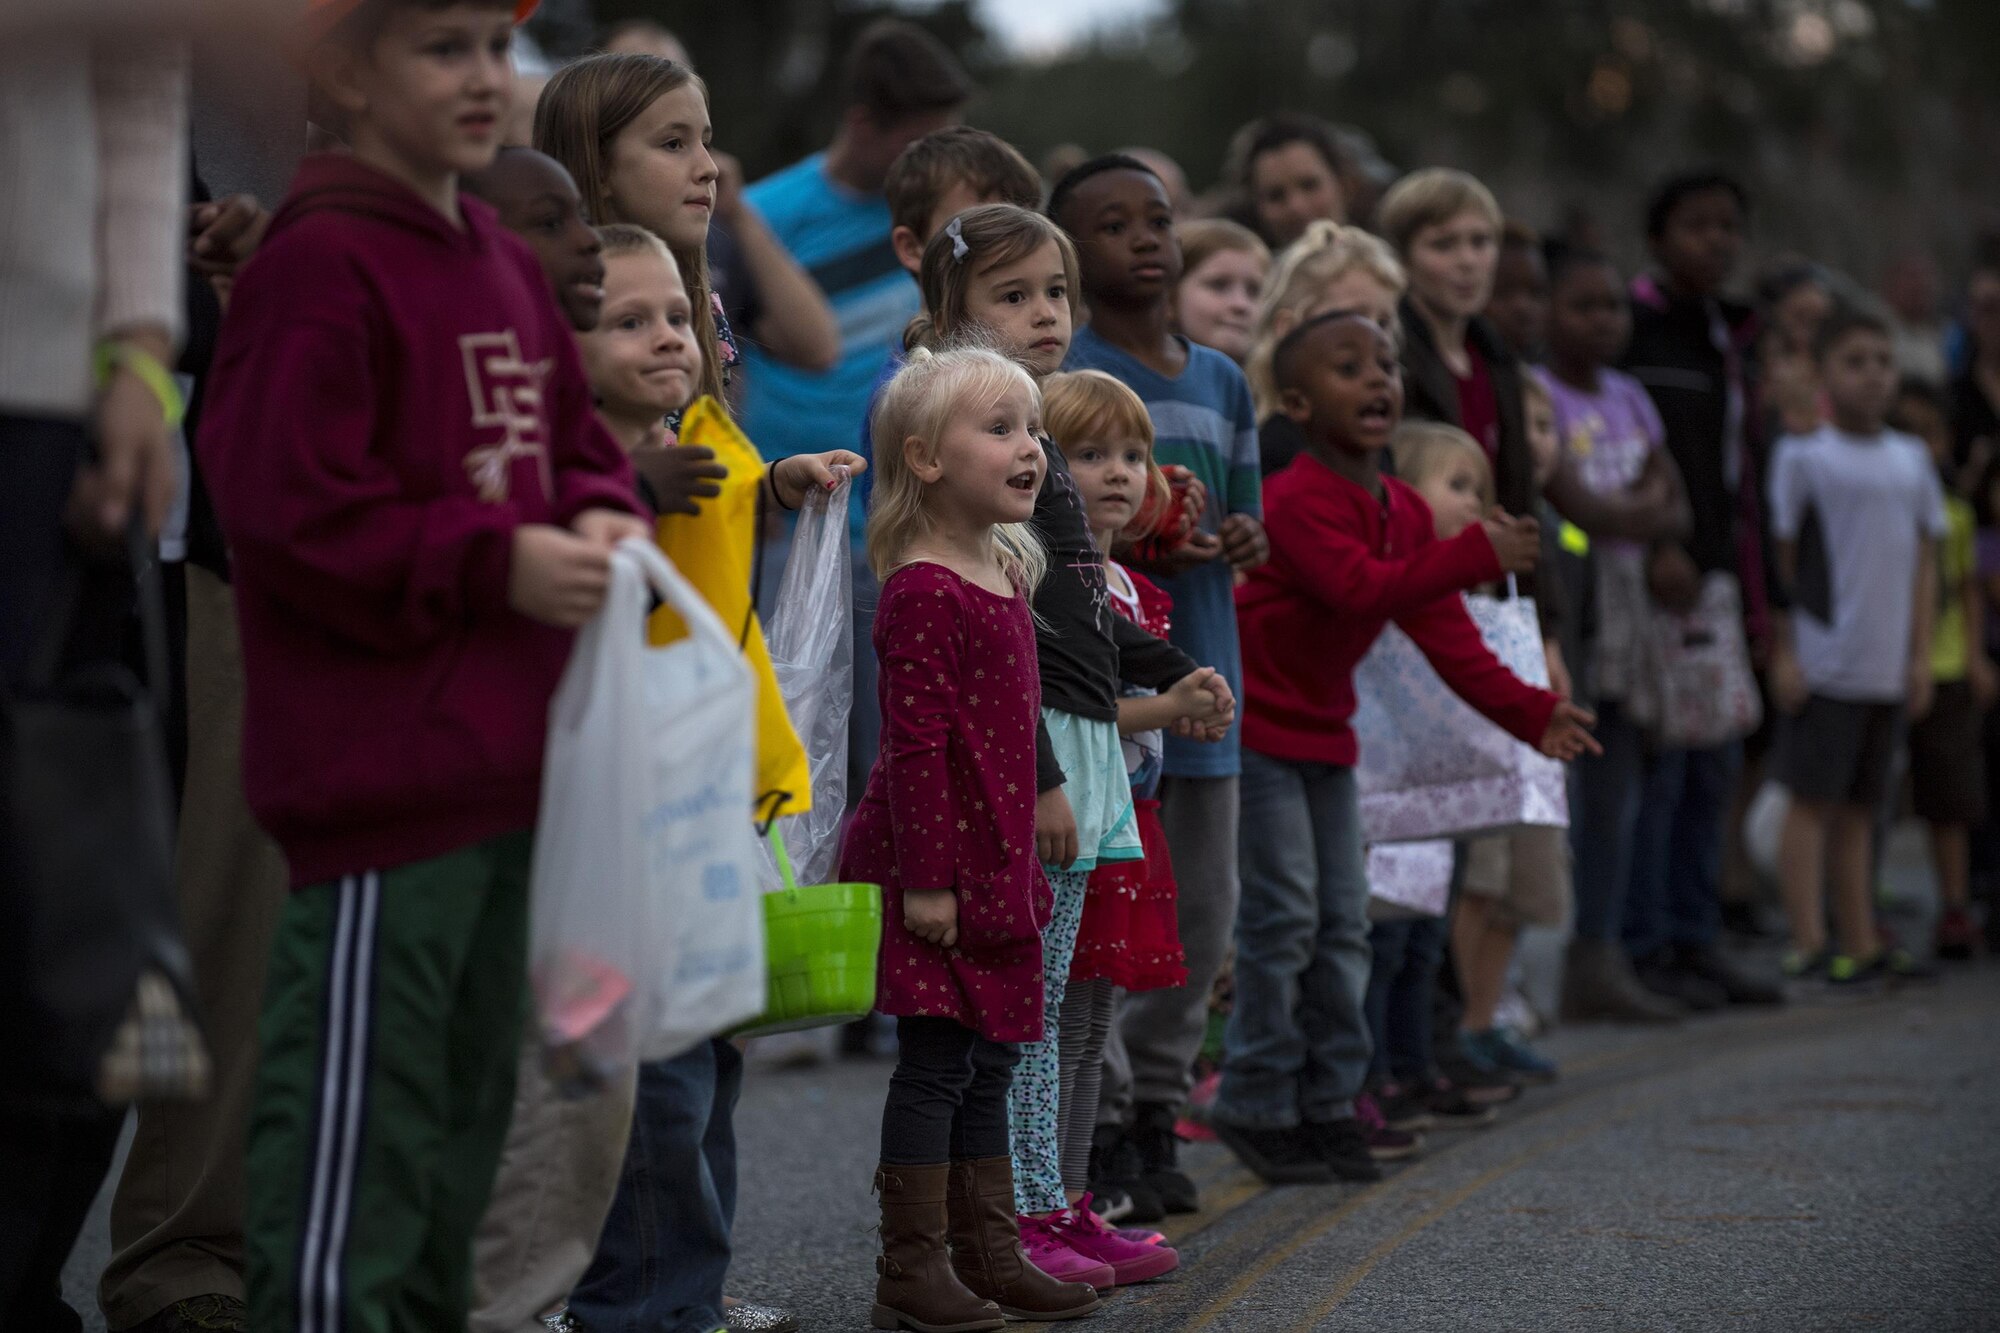 Children watch as the parade goes by, Dec. 1, 2017, at Moody Air Force Base, Ga. The annual event brings the base community together as a way to show thanks for their continuous sacrifice and celebrate the holiday season. The celebration included a parade, raffle give-a-ways, children’s activities and traditional lighting of the base Christmas tree by families of deployed Airmen. (U.S. Air Force photo by Andrea Jenkins)